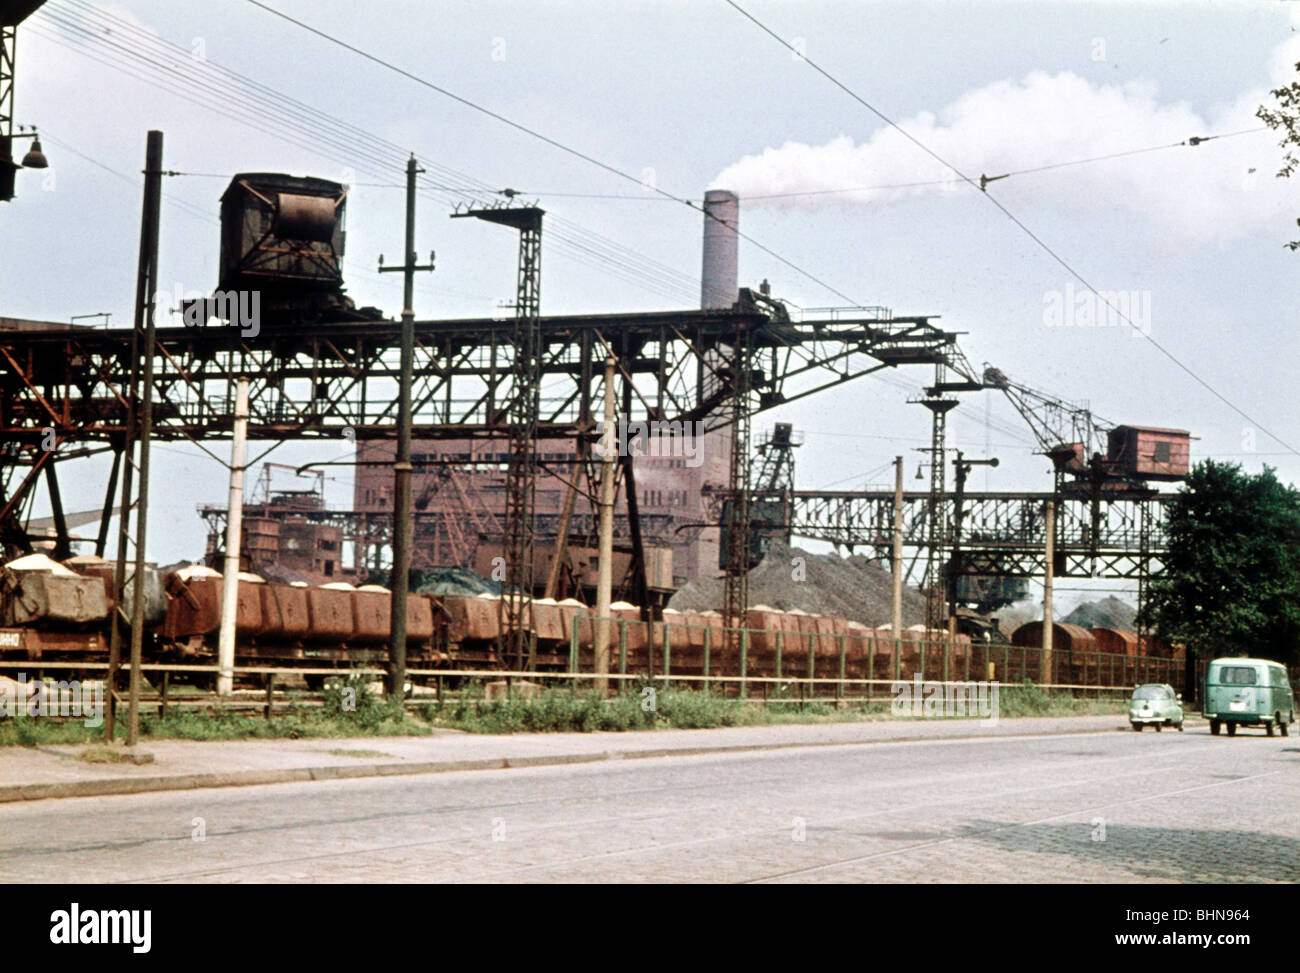 industry, energy, coal power plant, Ruhr area, North Rhine-Westphalia, Germany, 1960s, 60s, 20th century, historic, historical, Central Europe, North-Rhine, Rhine, Westphalia, Nordrhein-Westfalen, Nordrhein-Westphalen, Ruhr Valley, crane plant, facility, exterior view, chimney, chimneys, railroad, industrial plant, industrial plants, coal industry, Stock Photo